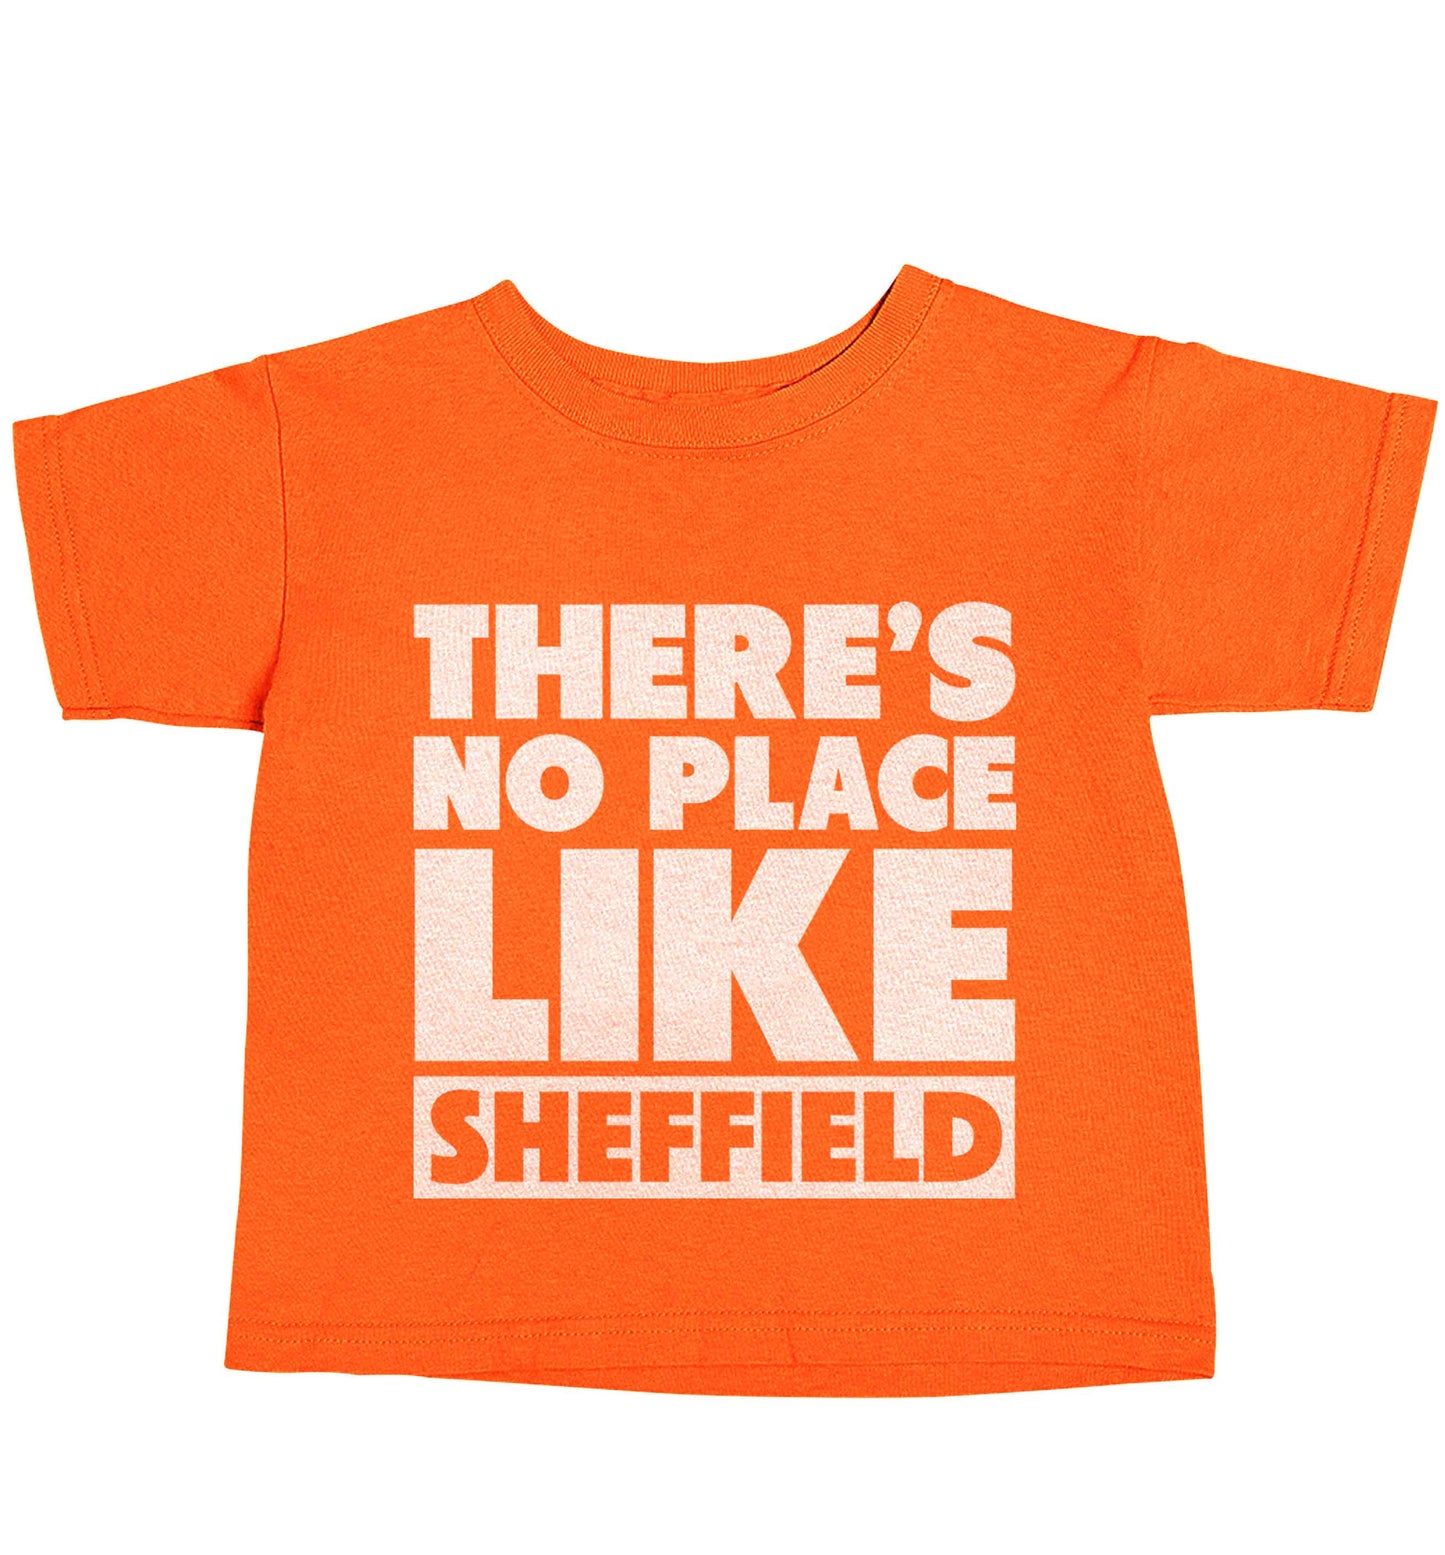 There's no place like Sheffield orange baby toddler Tshirt 2 Years